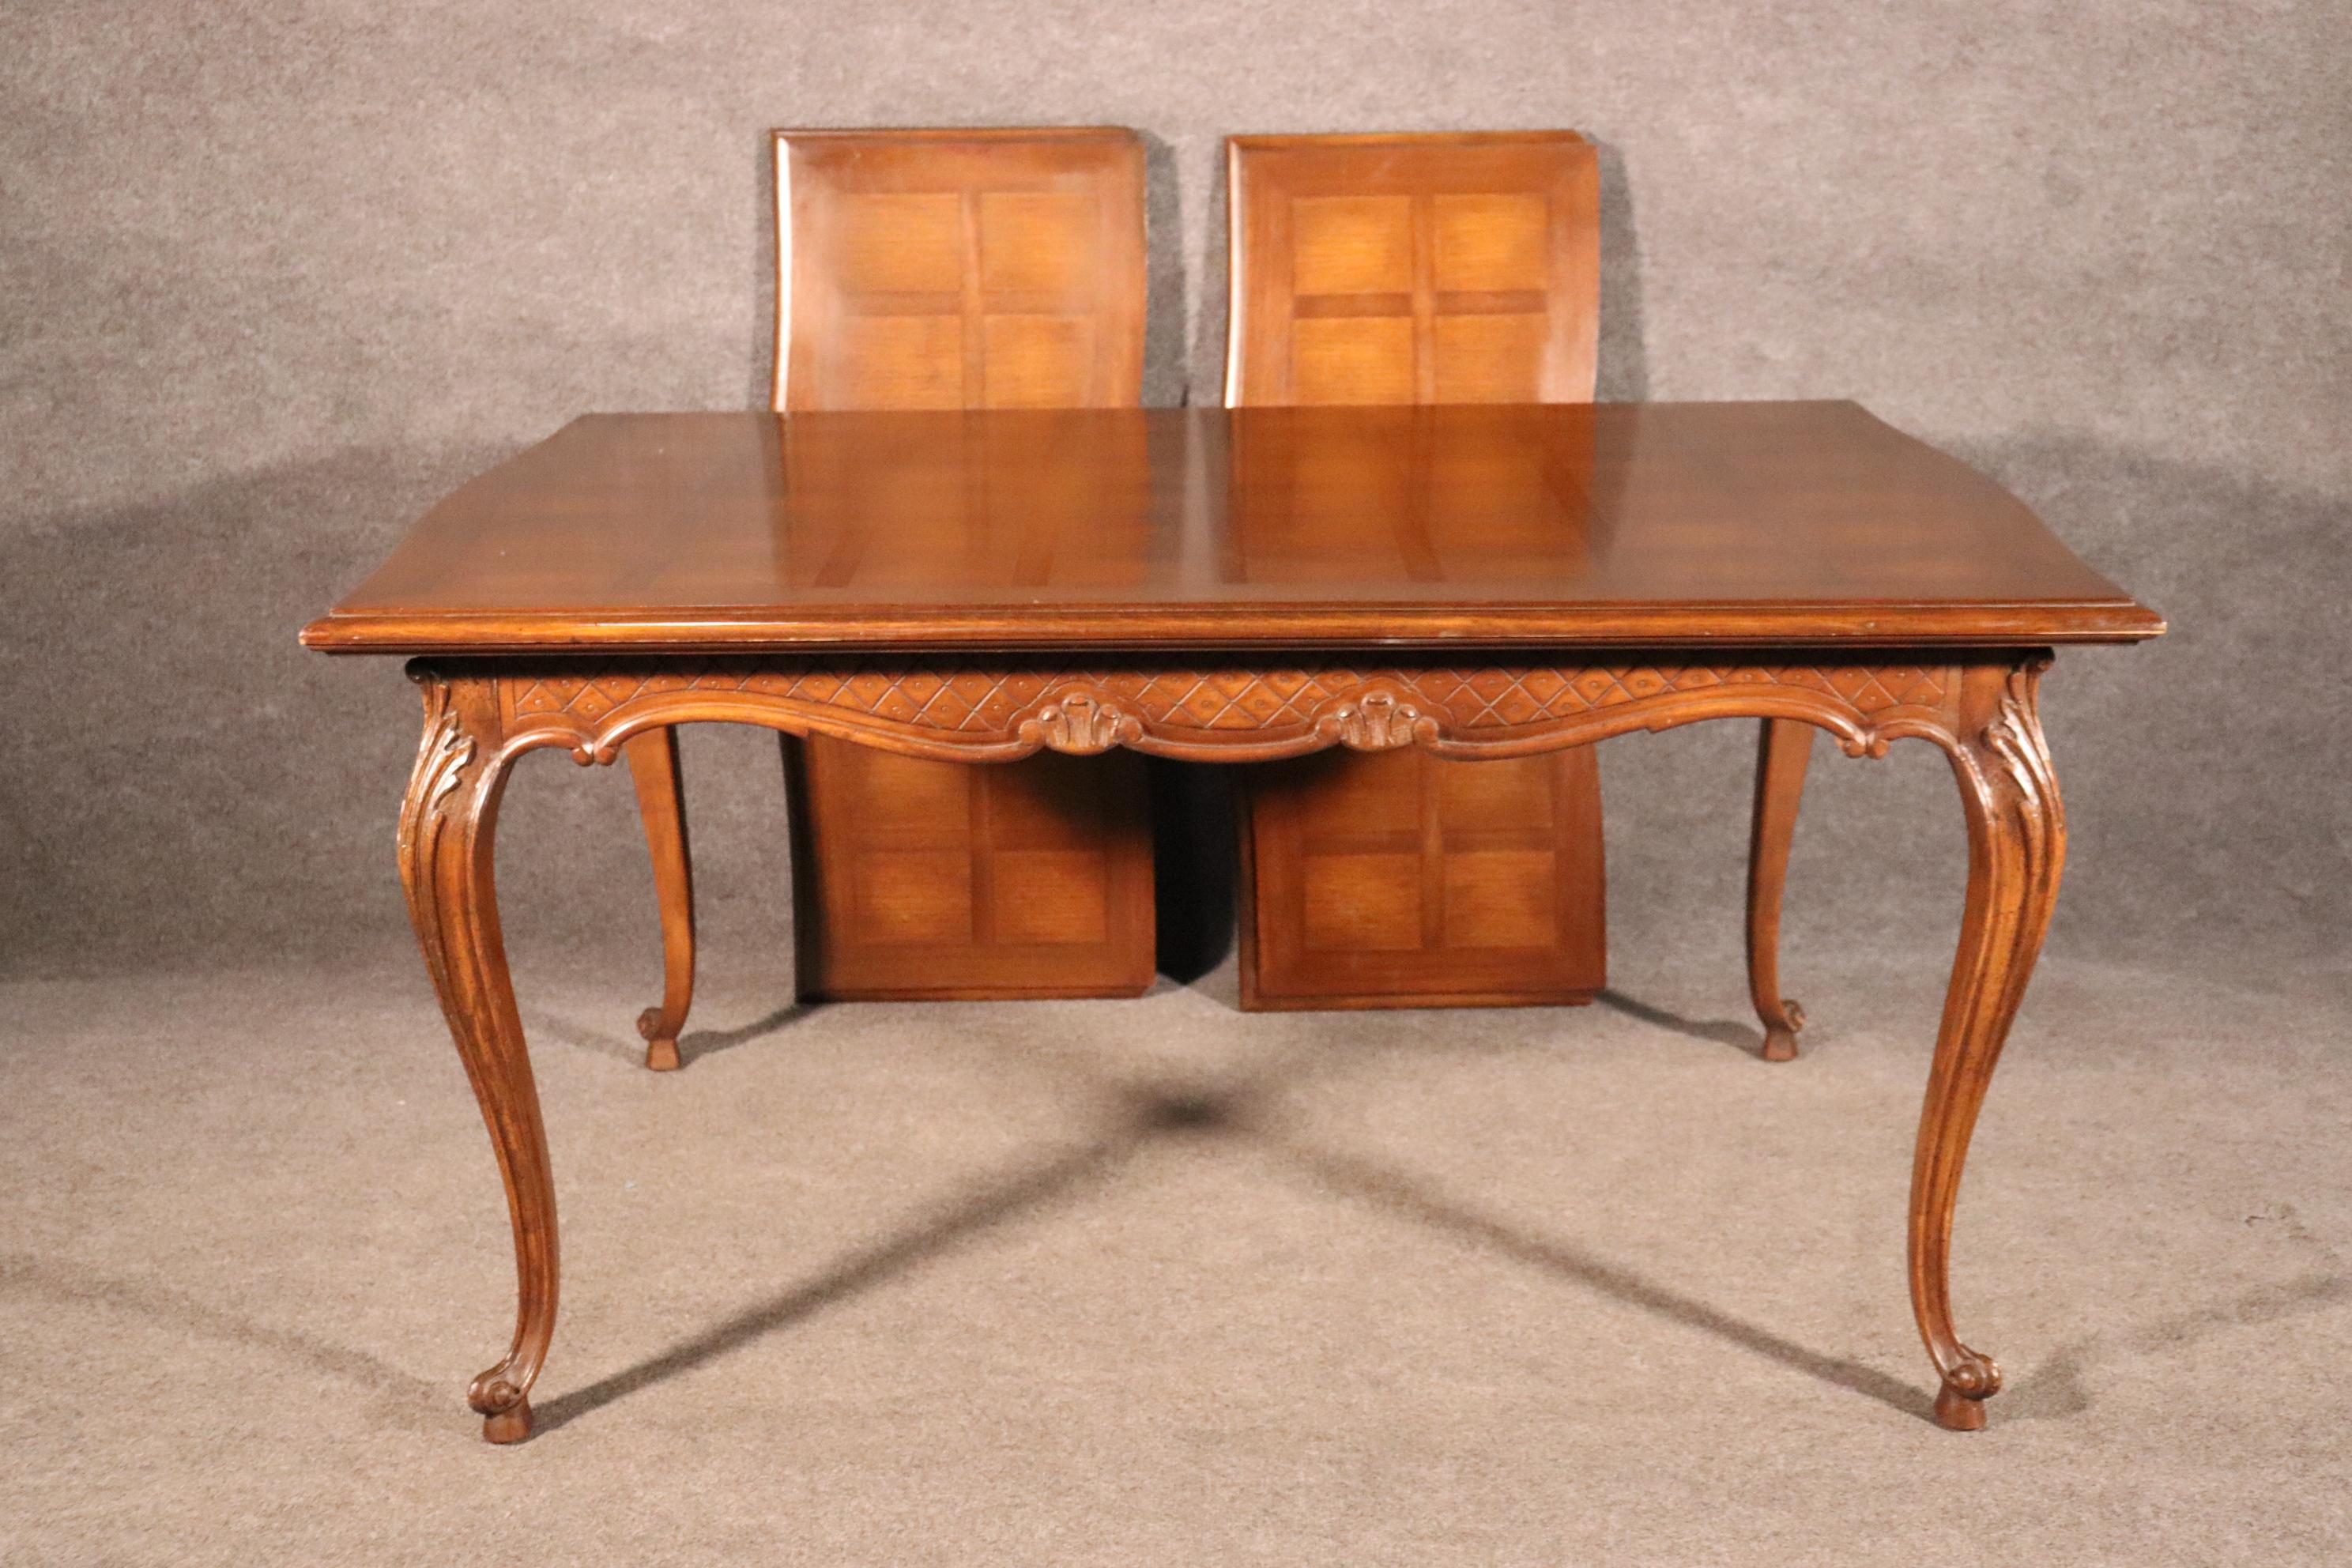 This is a charming French country or Louis XV dining table with two leaves. The table is made of walnut and is in good condition with minor signs of age related wear and signs of use. The table measures 42 wide x 59 long x 30 tall. The leaves each